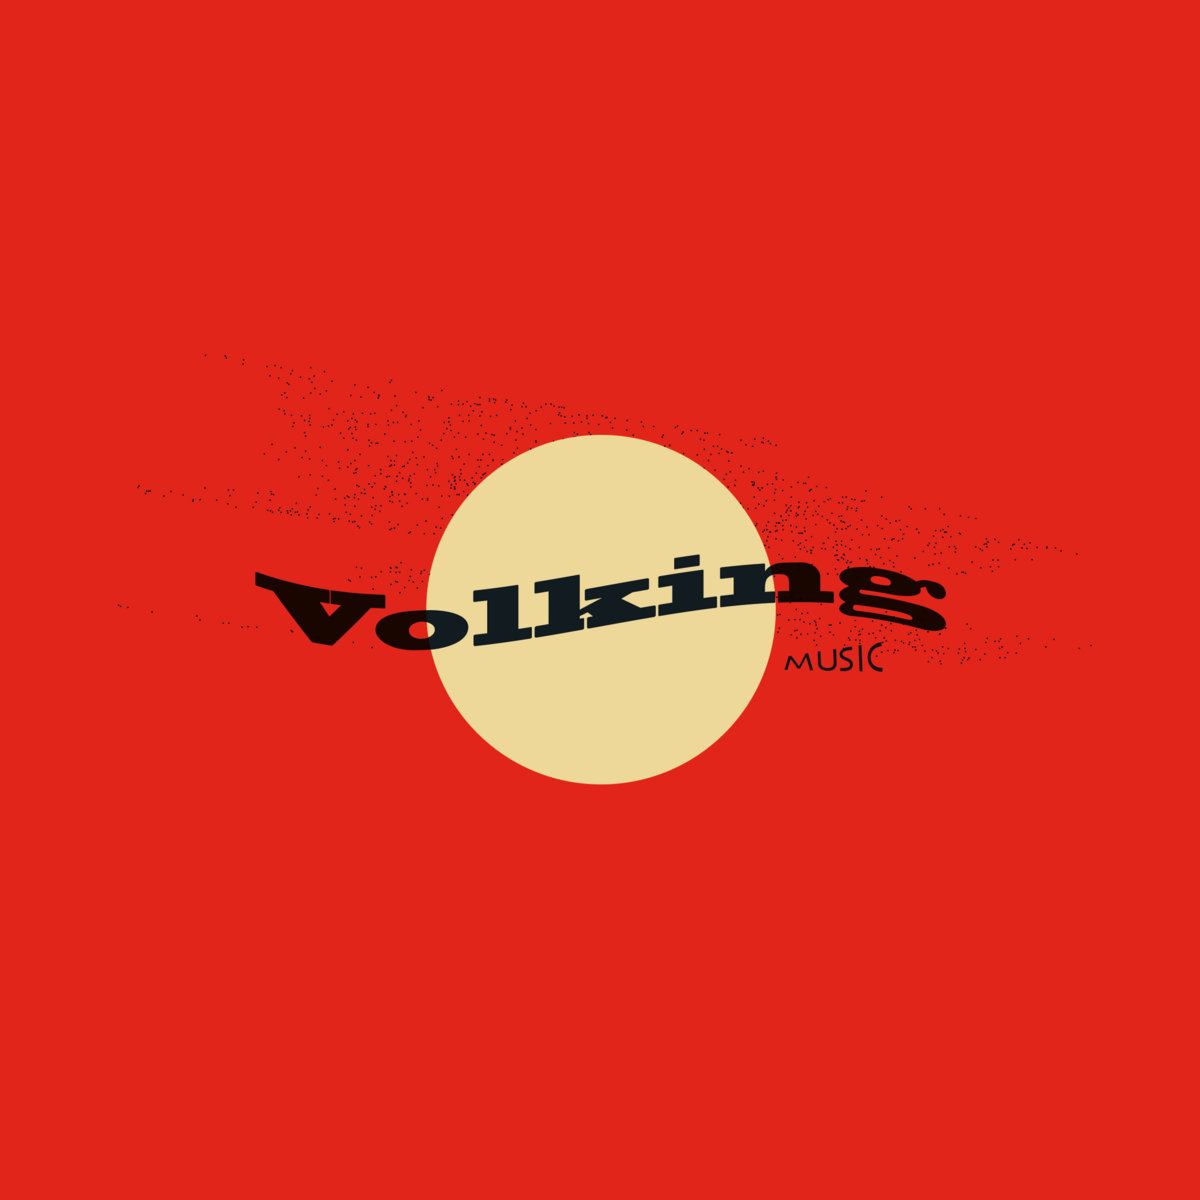 A red background with a yellow circle in the middle and the word volking music written on top of it - Music